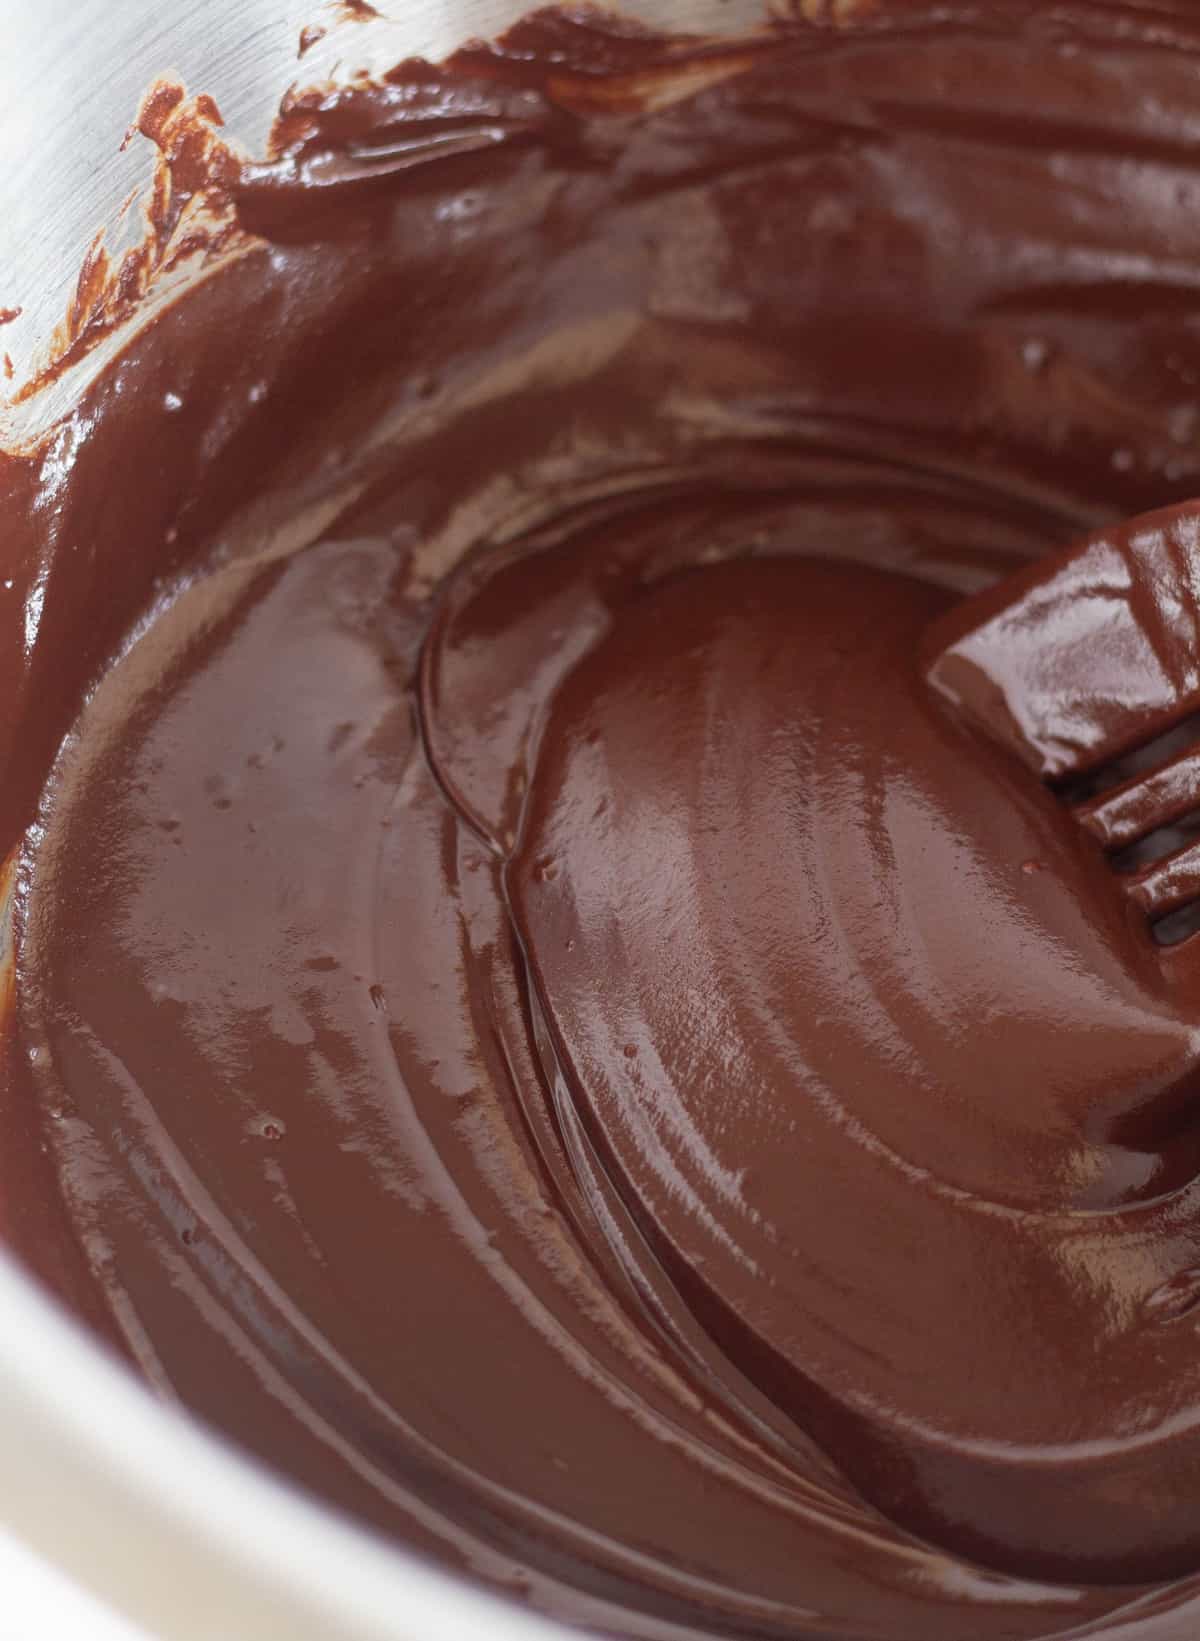 melted chocolate mixture in bowl.